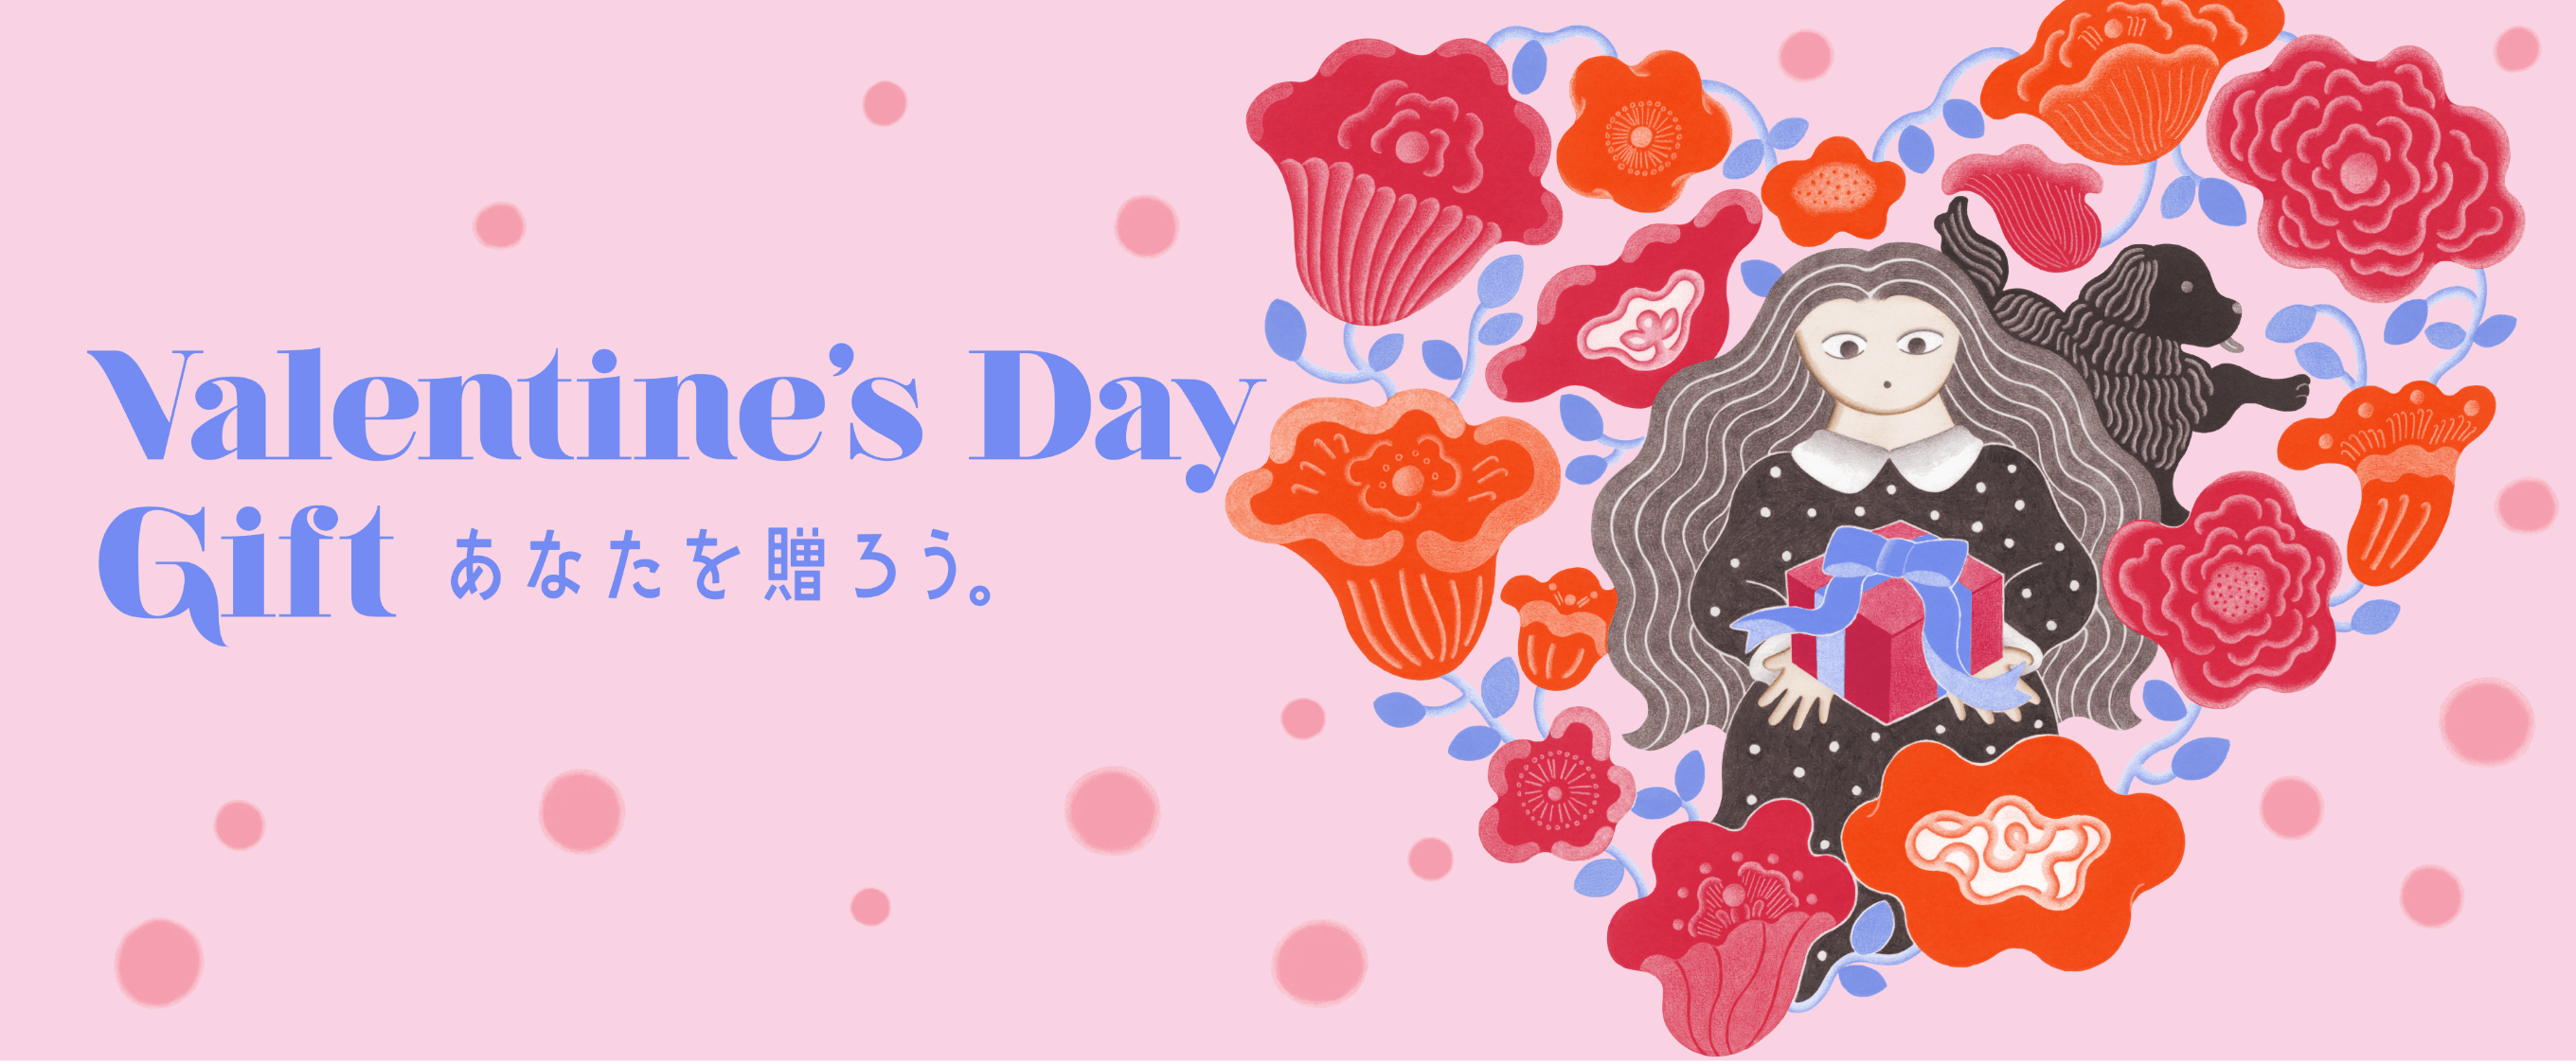 Valentine's Day Gift│広島PARCO